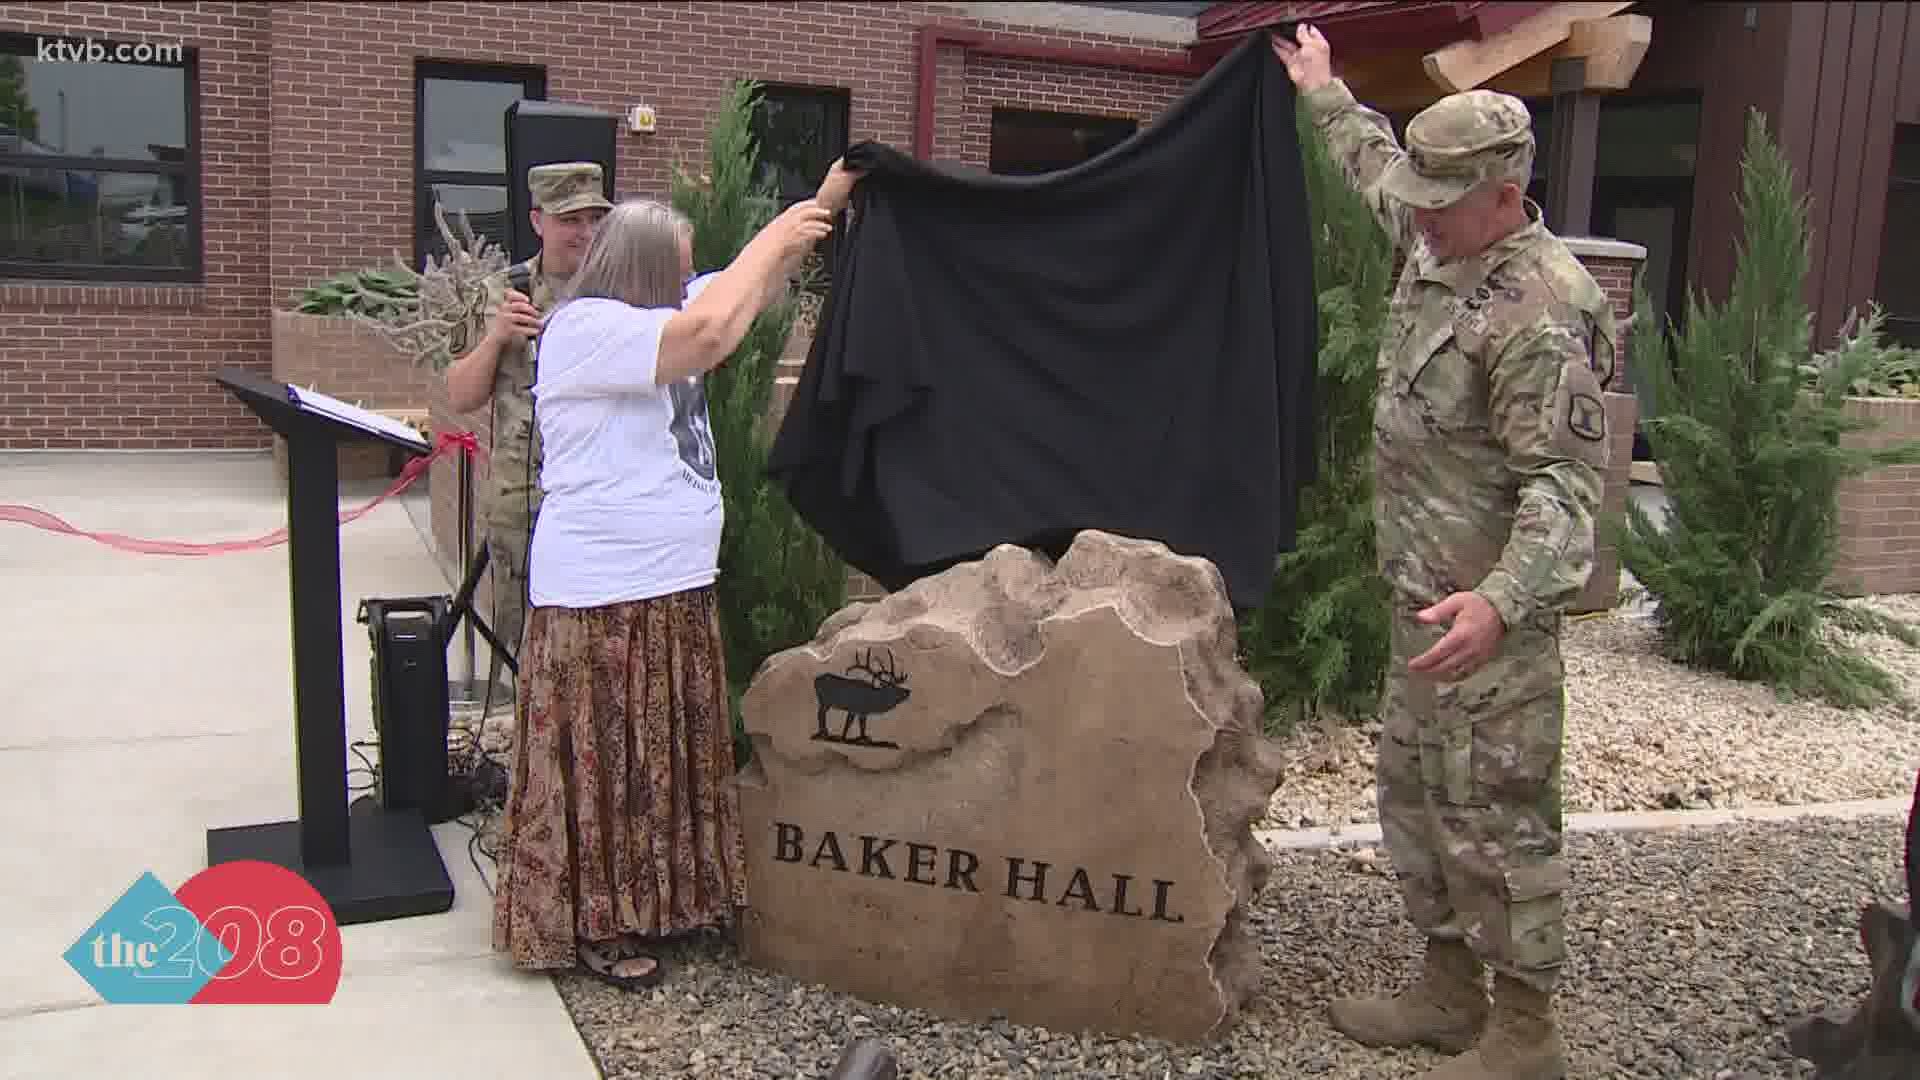 The Idaho National Guard at Gowen Field in Boise is honoring Baker. They unveiled their newest barracks, adorned with his name.